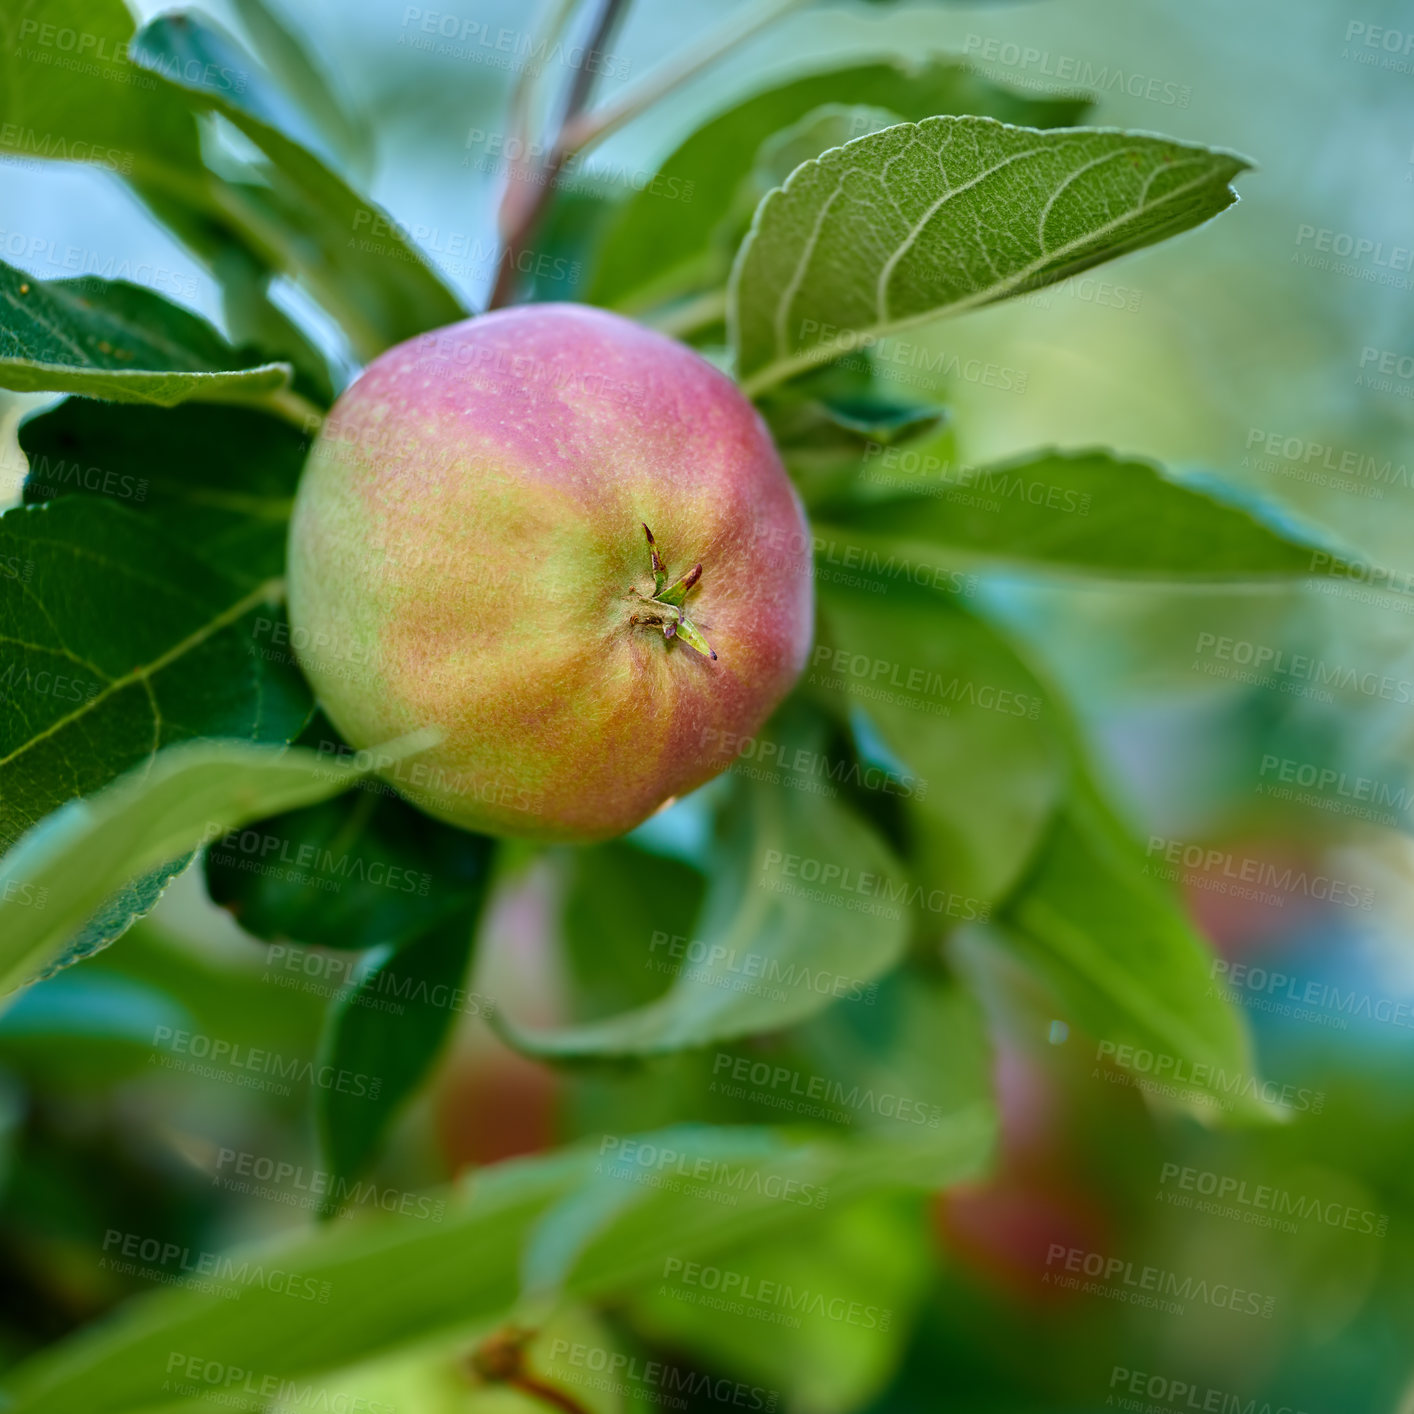 Buy stock photo closeup of an Empire apple on a tree branch in an orchard on a sunny day outdoors. Fresh, sweet and organic produce growing in a sustainable fruit farm. Ripe, juicy and ready for harvest

